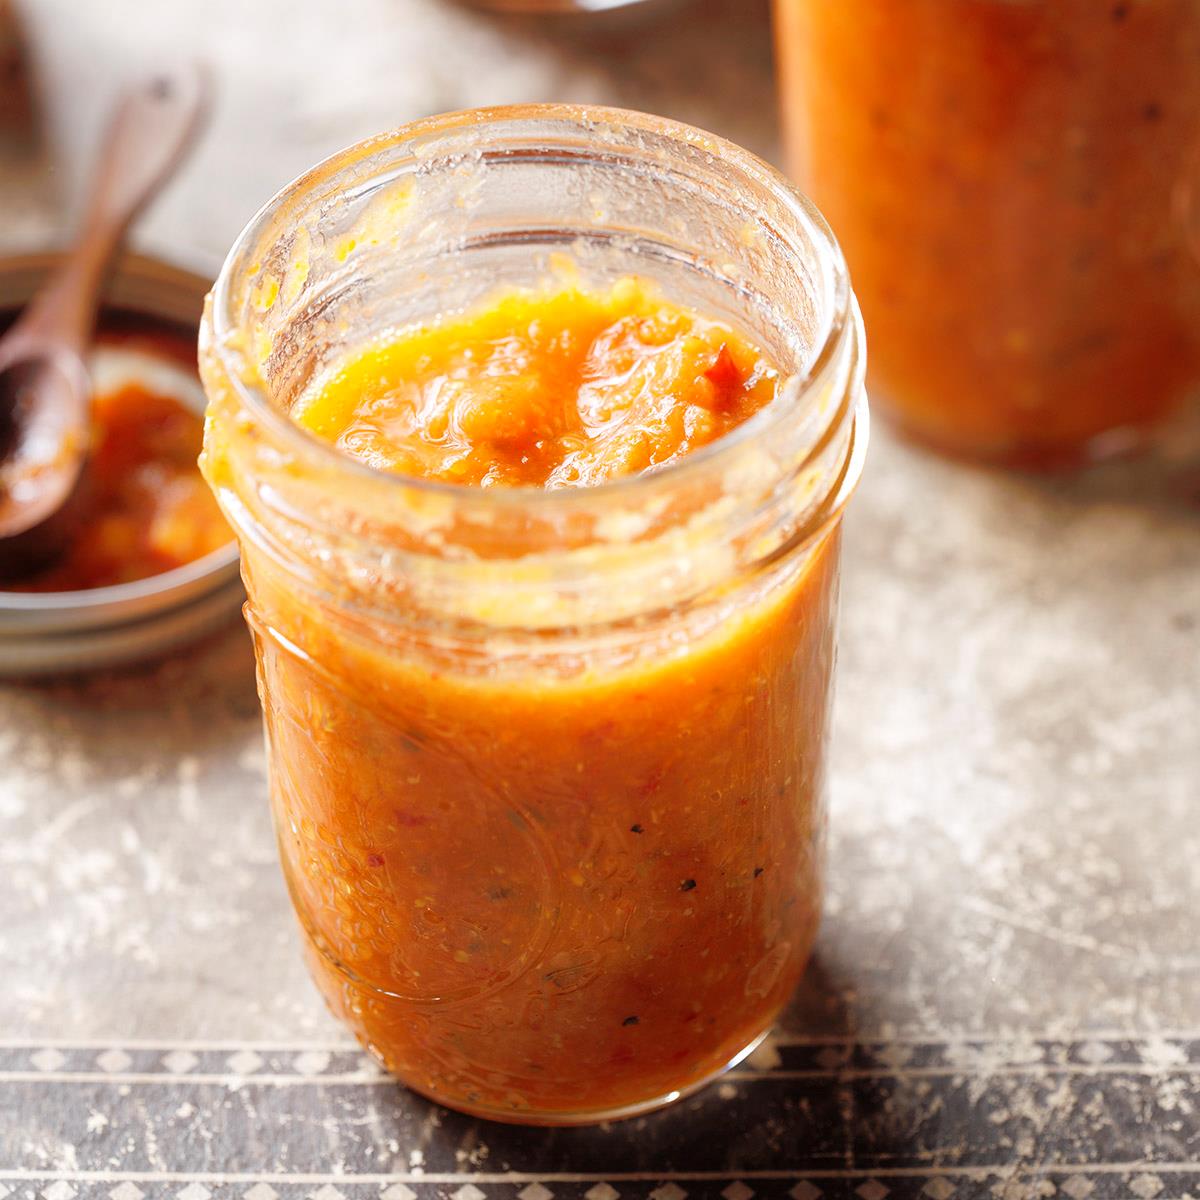 Homemade Spicy Hot Sauce Recipe Taste of Home